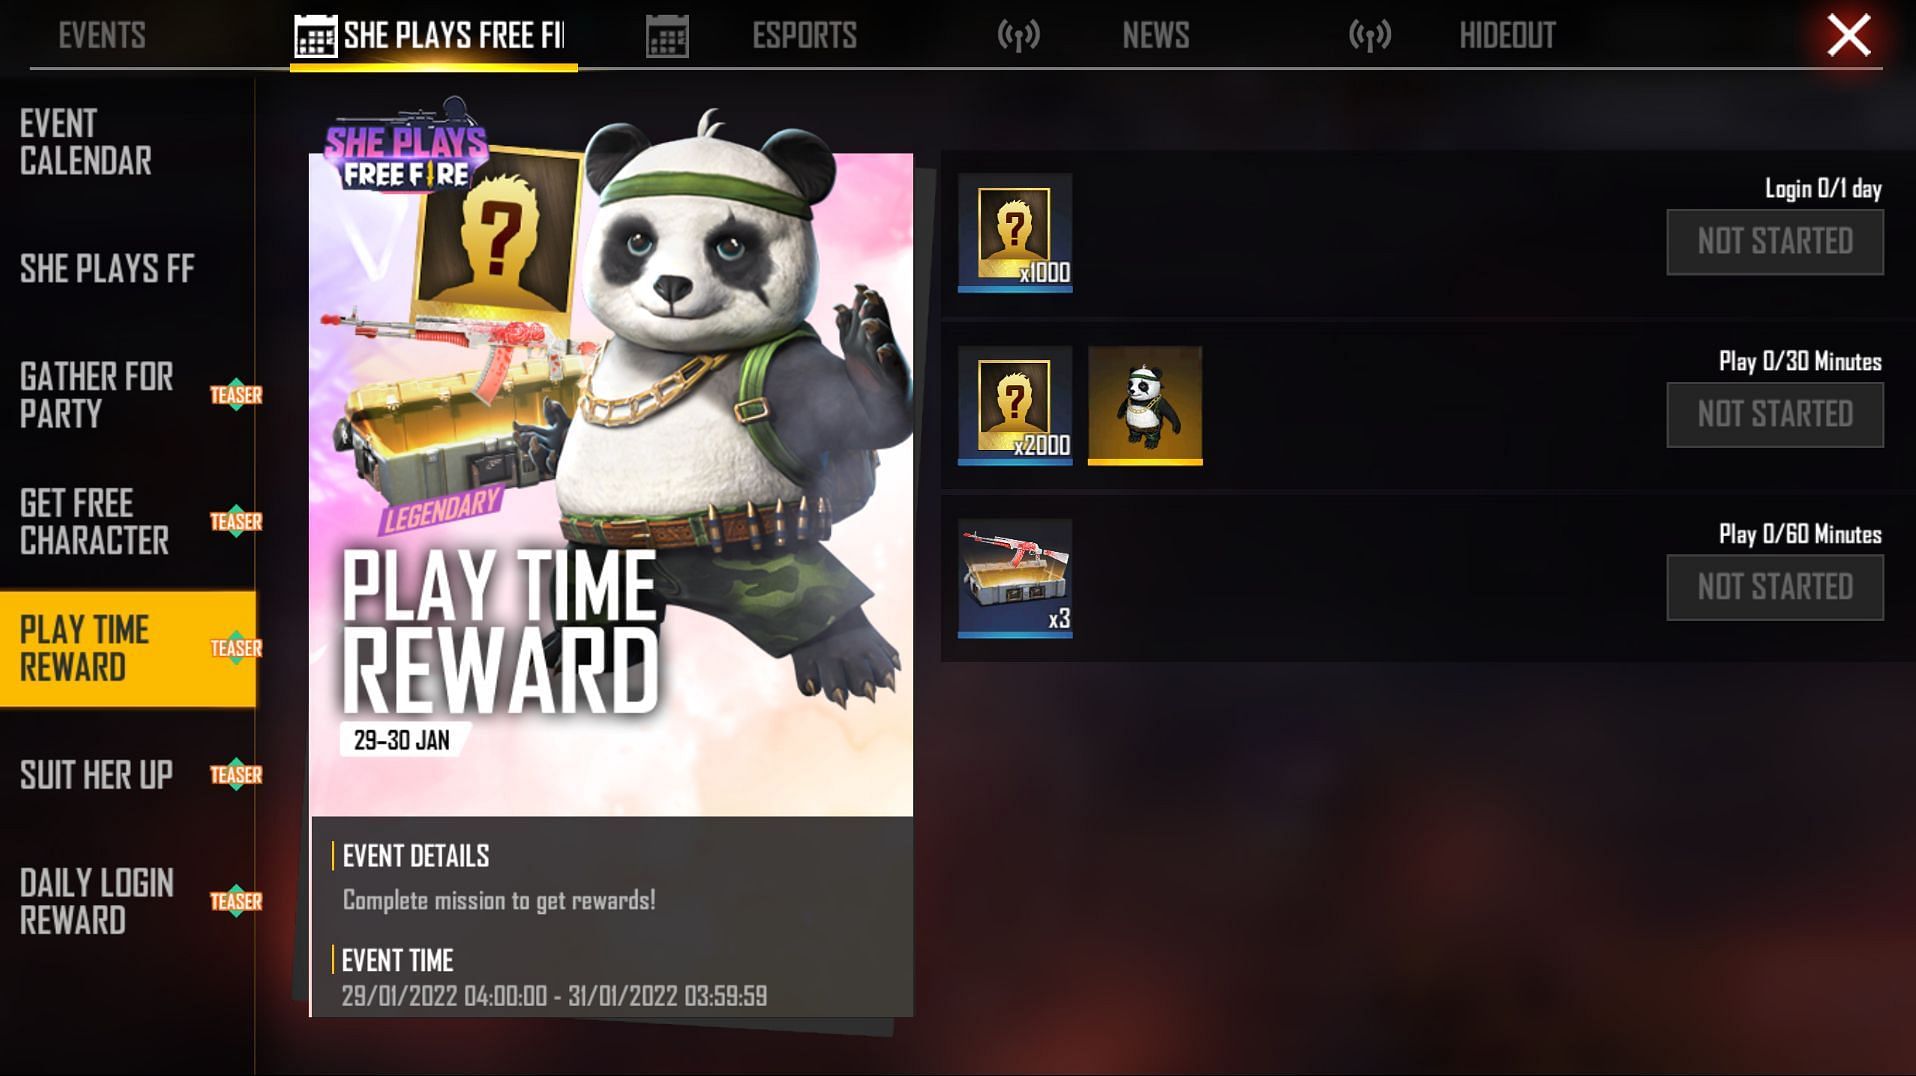 Users must play Free Fire for a particular duration (Image via Garena)